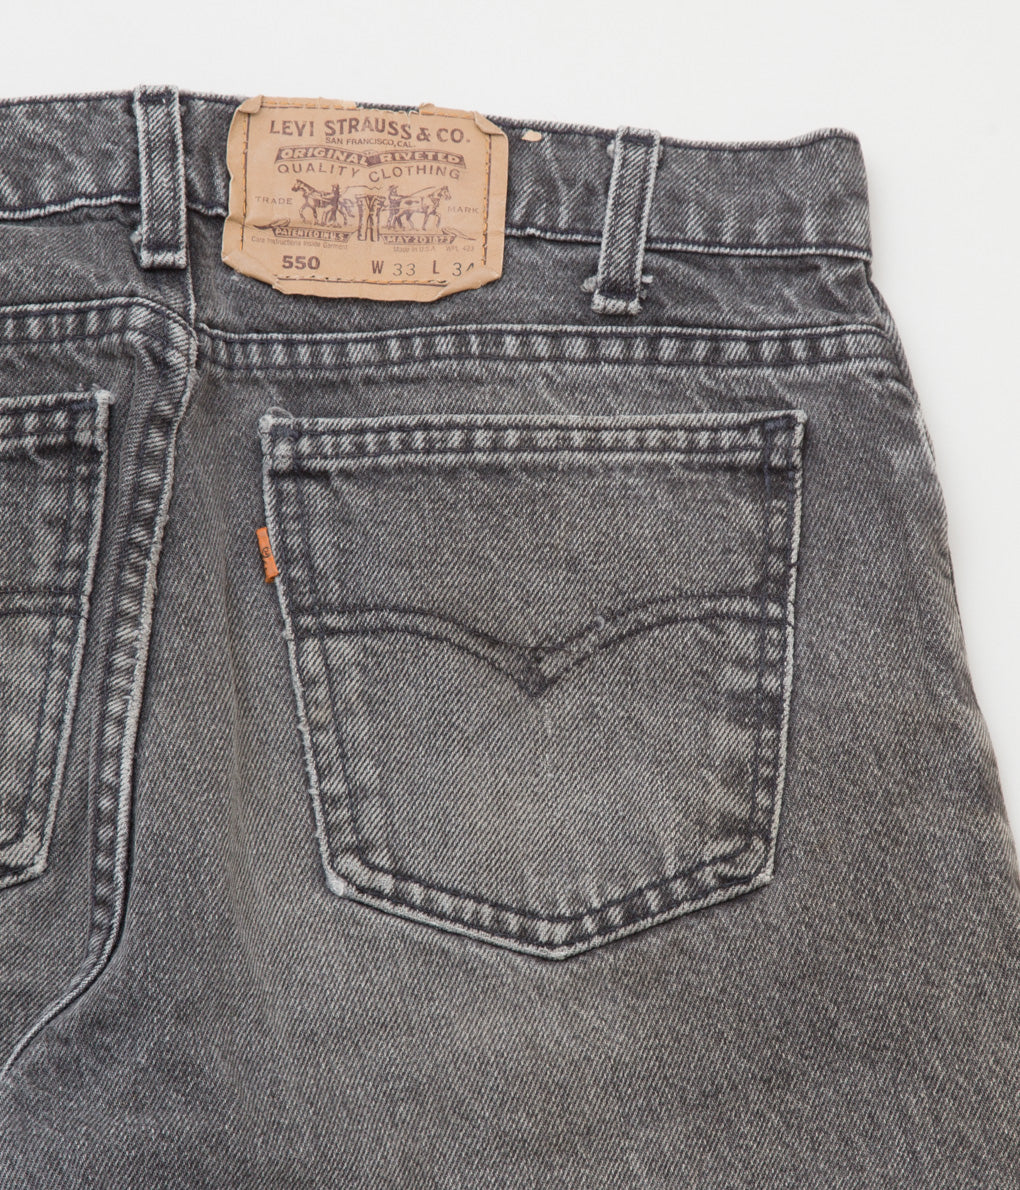 VINTAGE "90's LEVI'S 550 BLACK MADE IN USA "(W33/L32)